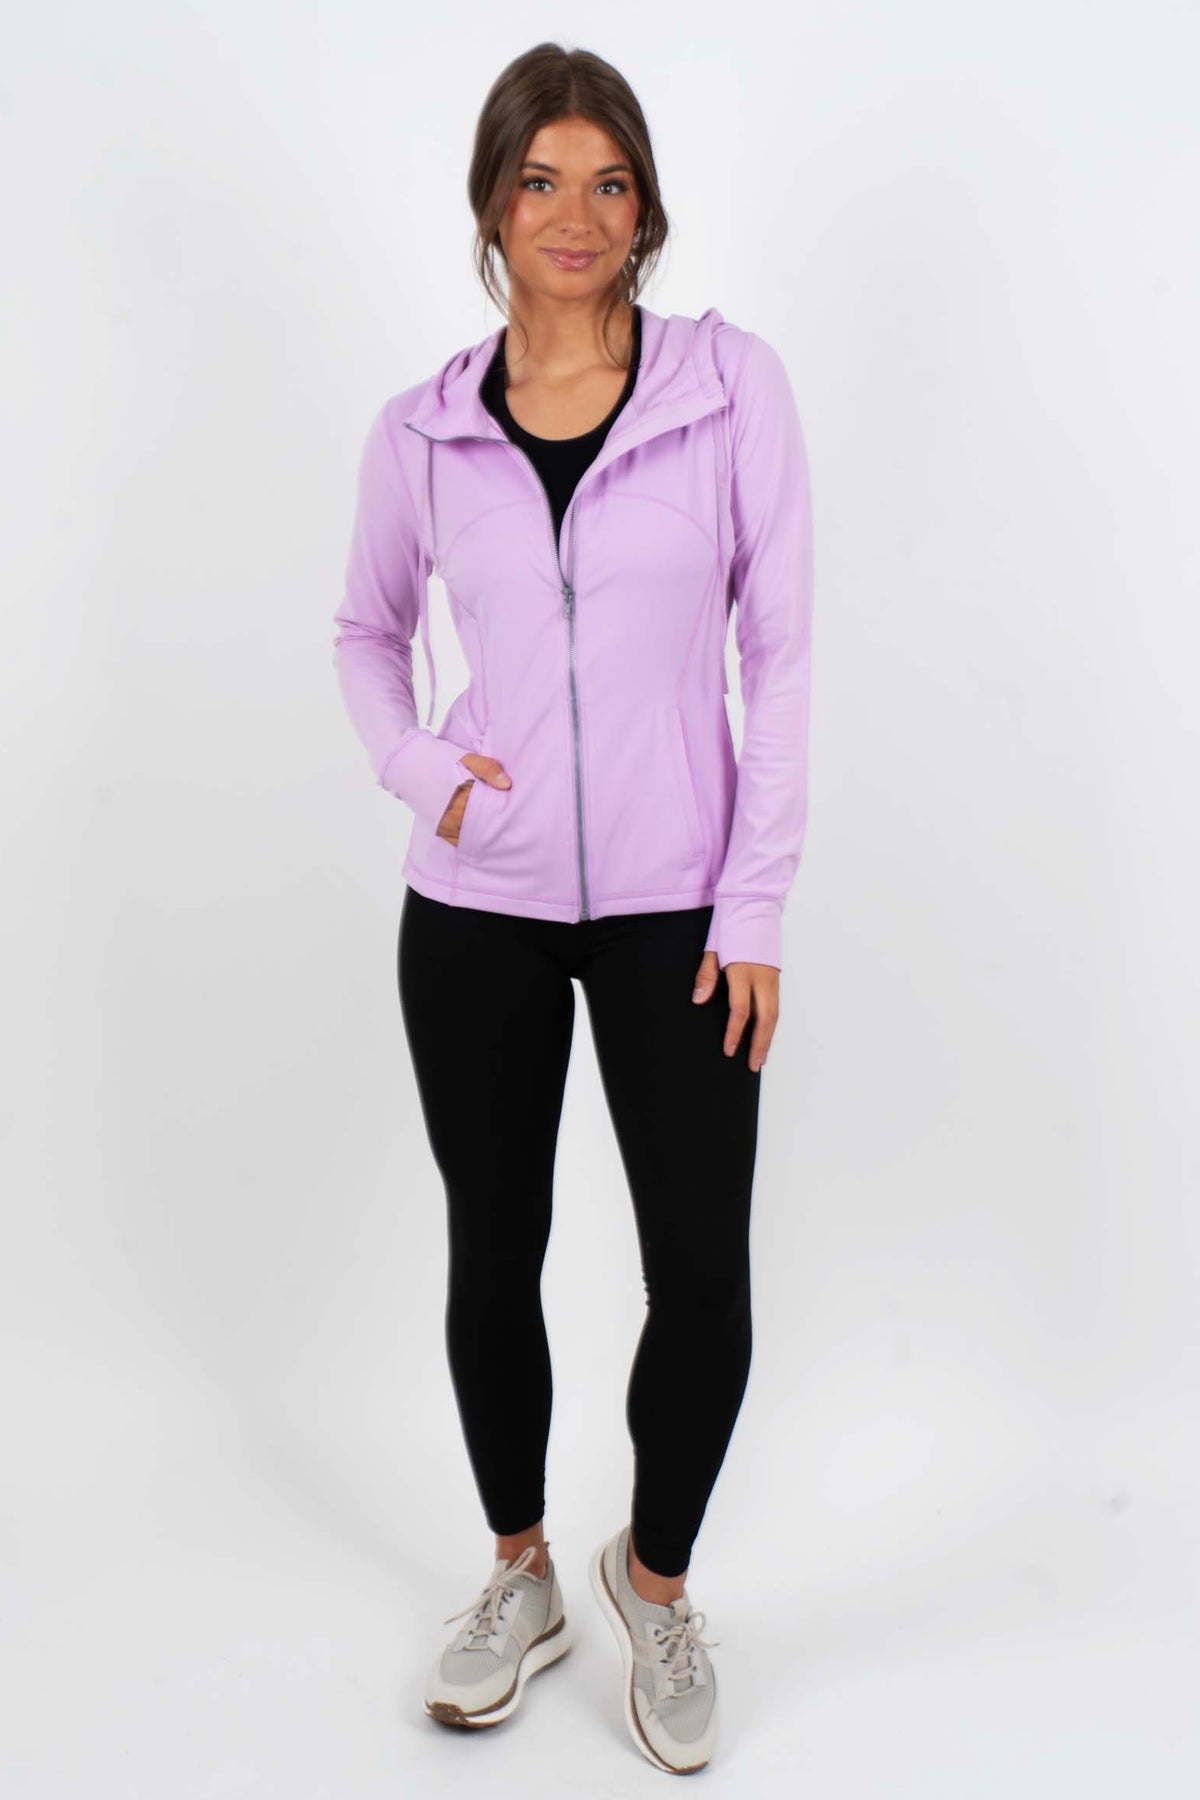 Align Yourself Jacket (Lilac)